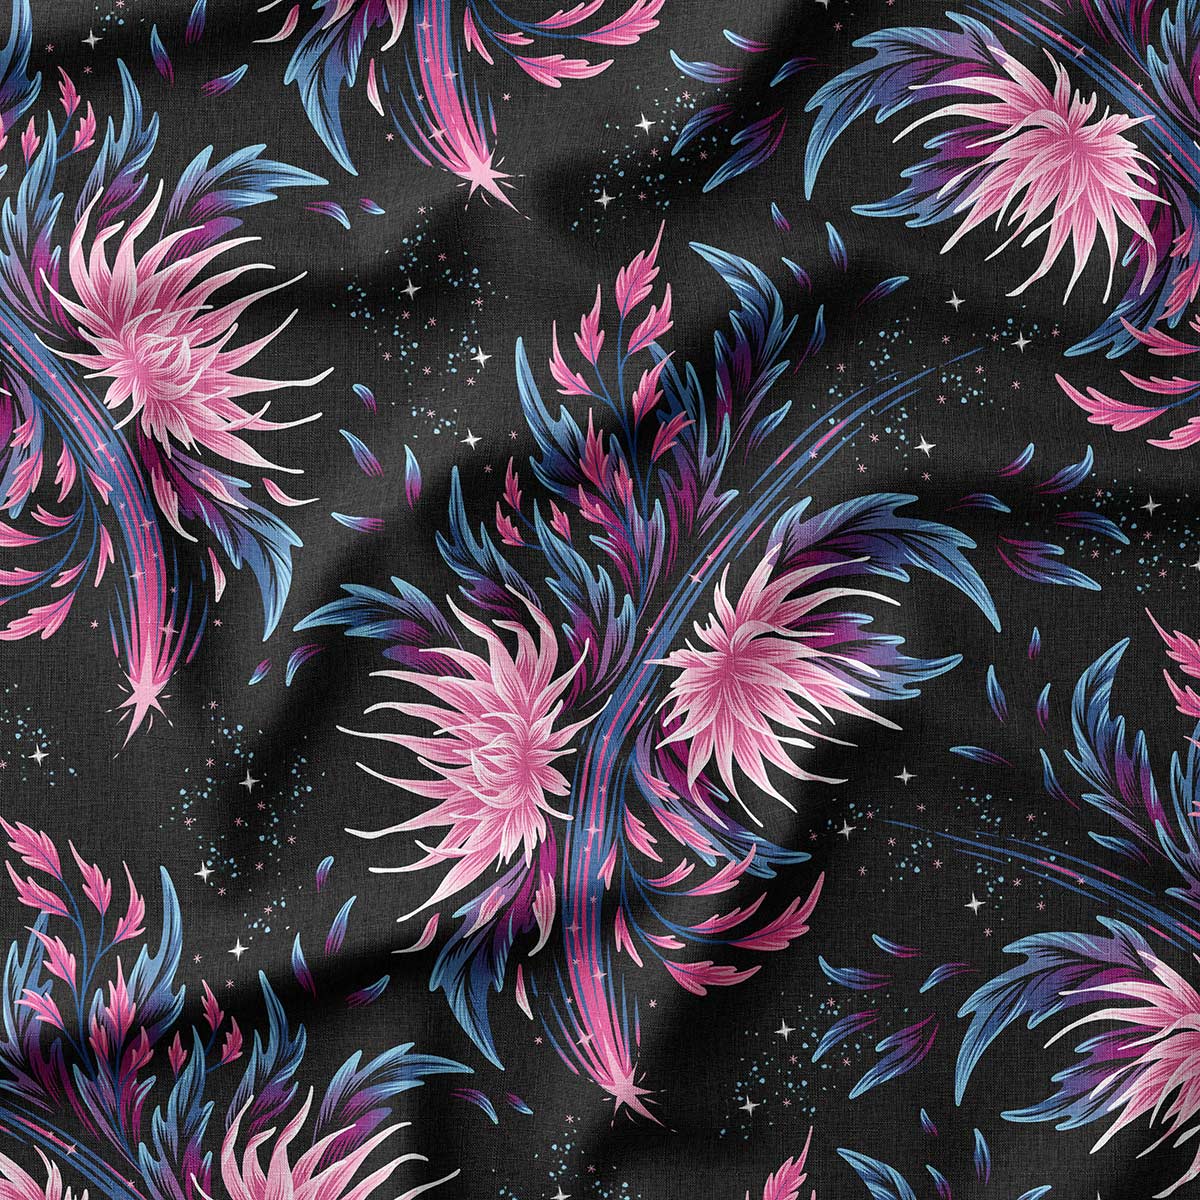 Floral supernova galaxy pink and black fabric pattern by Andrea Muller